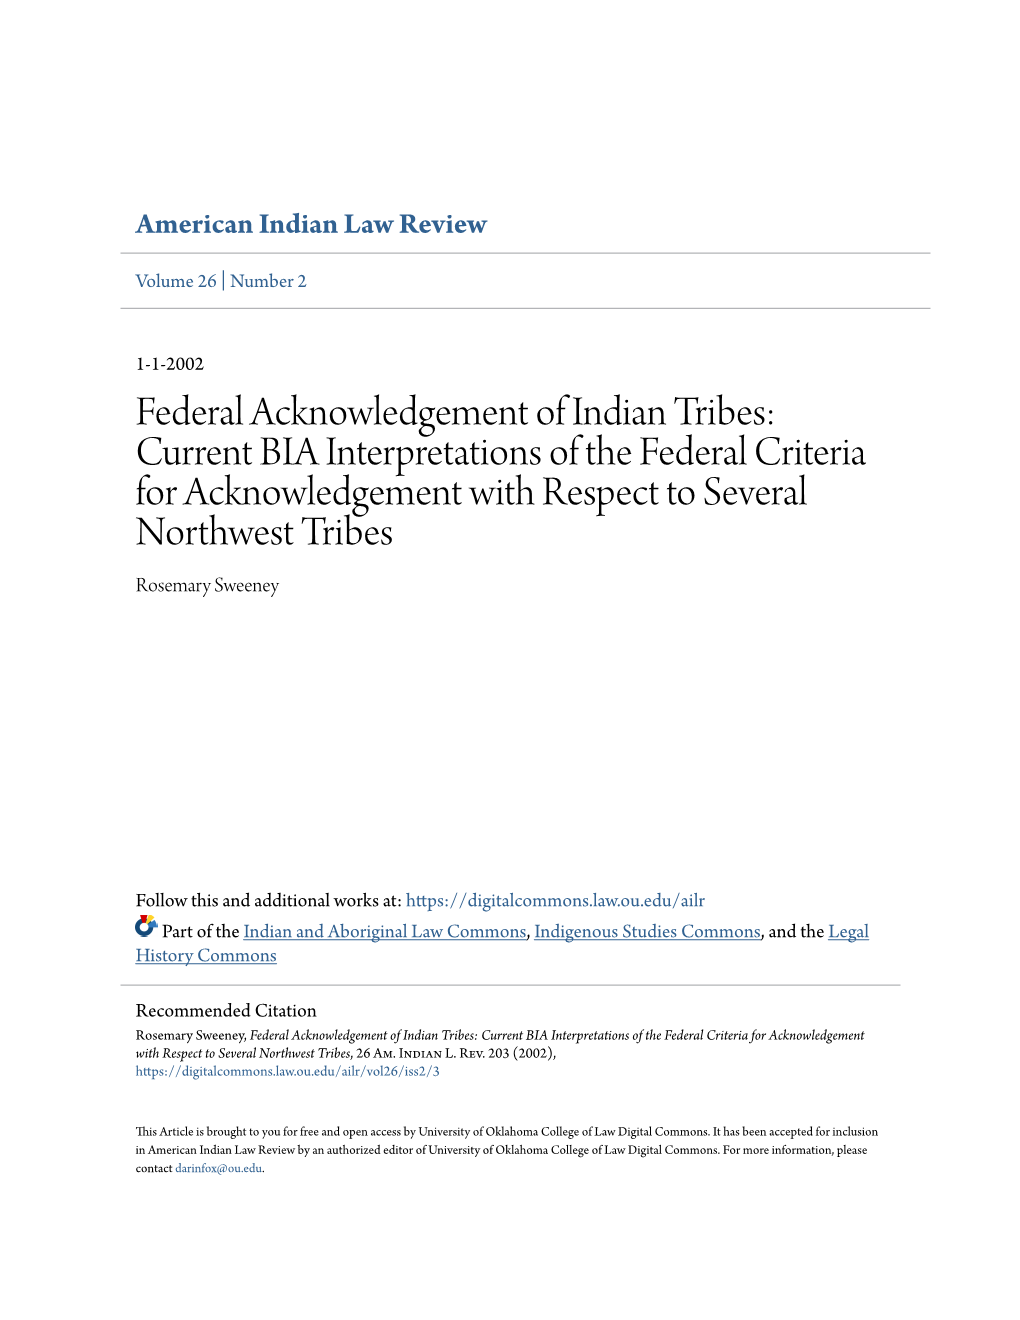 Federal Acknowledgement of Indian Tribes